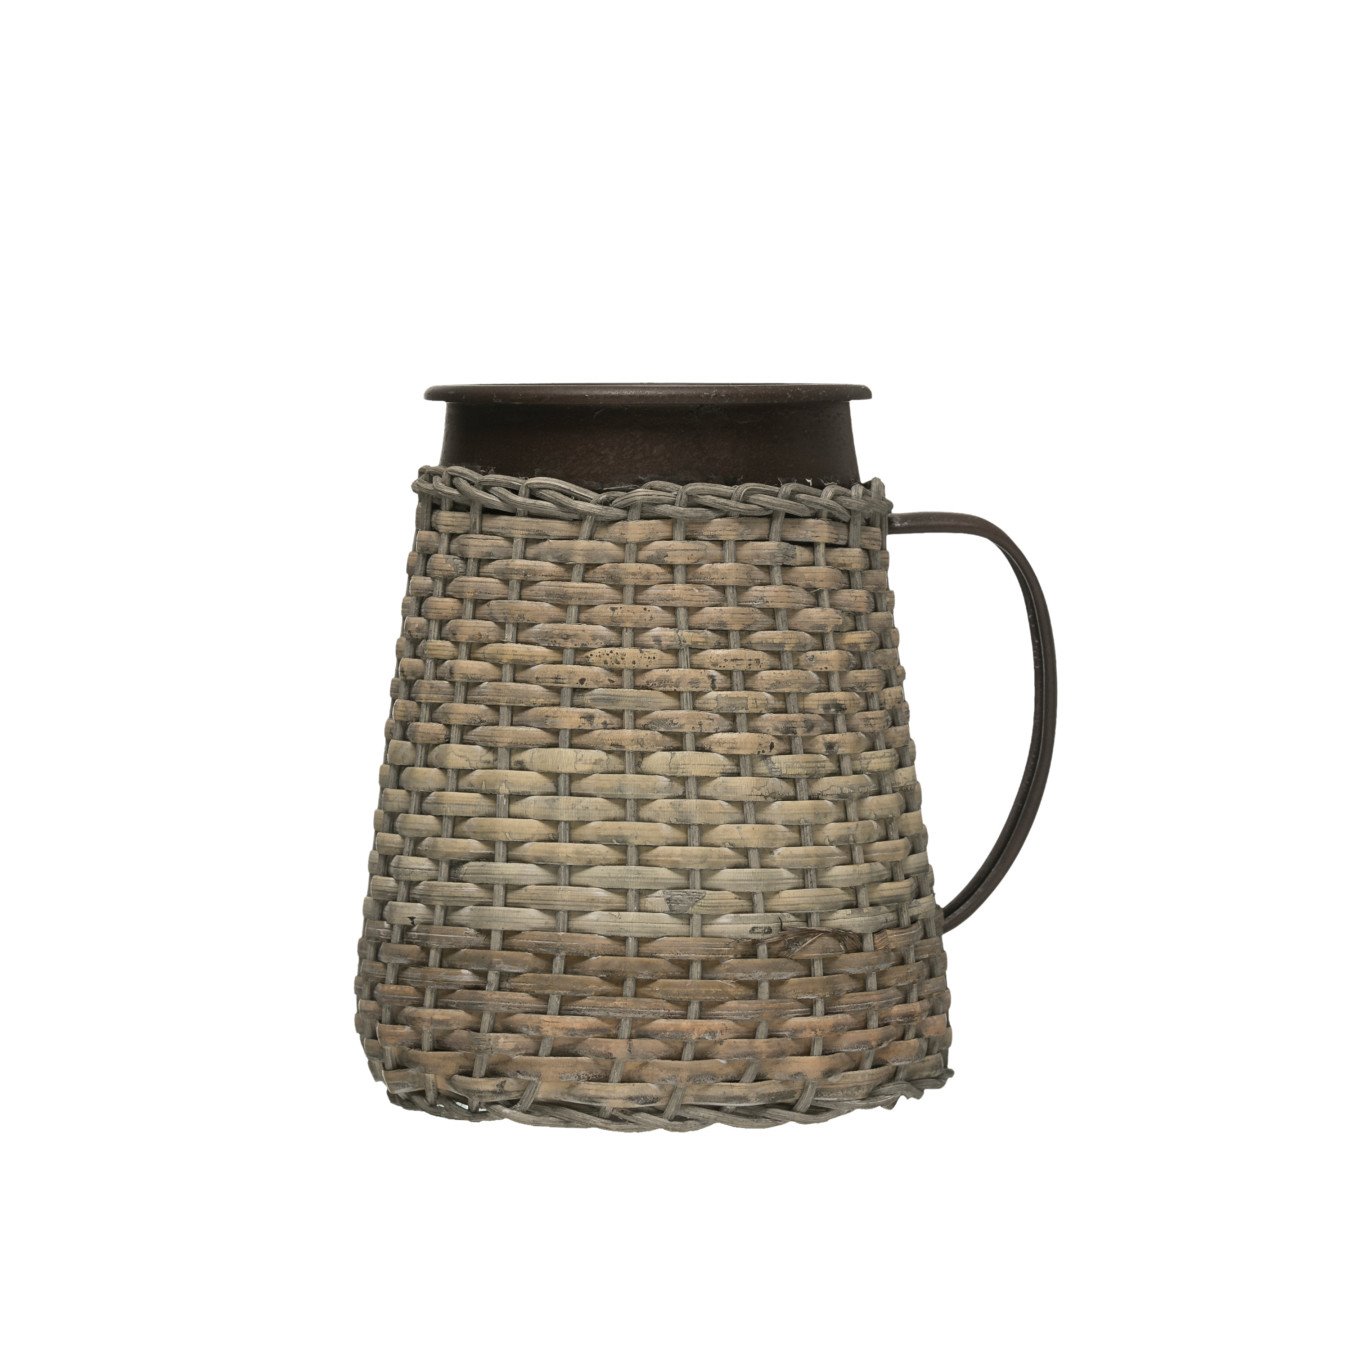 7"H Decorative Metal Pitcher with Woven Rattan Sleeve